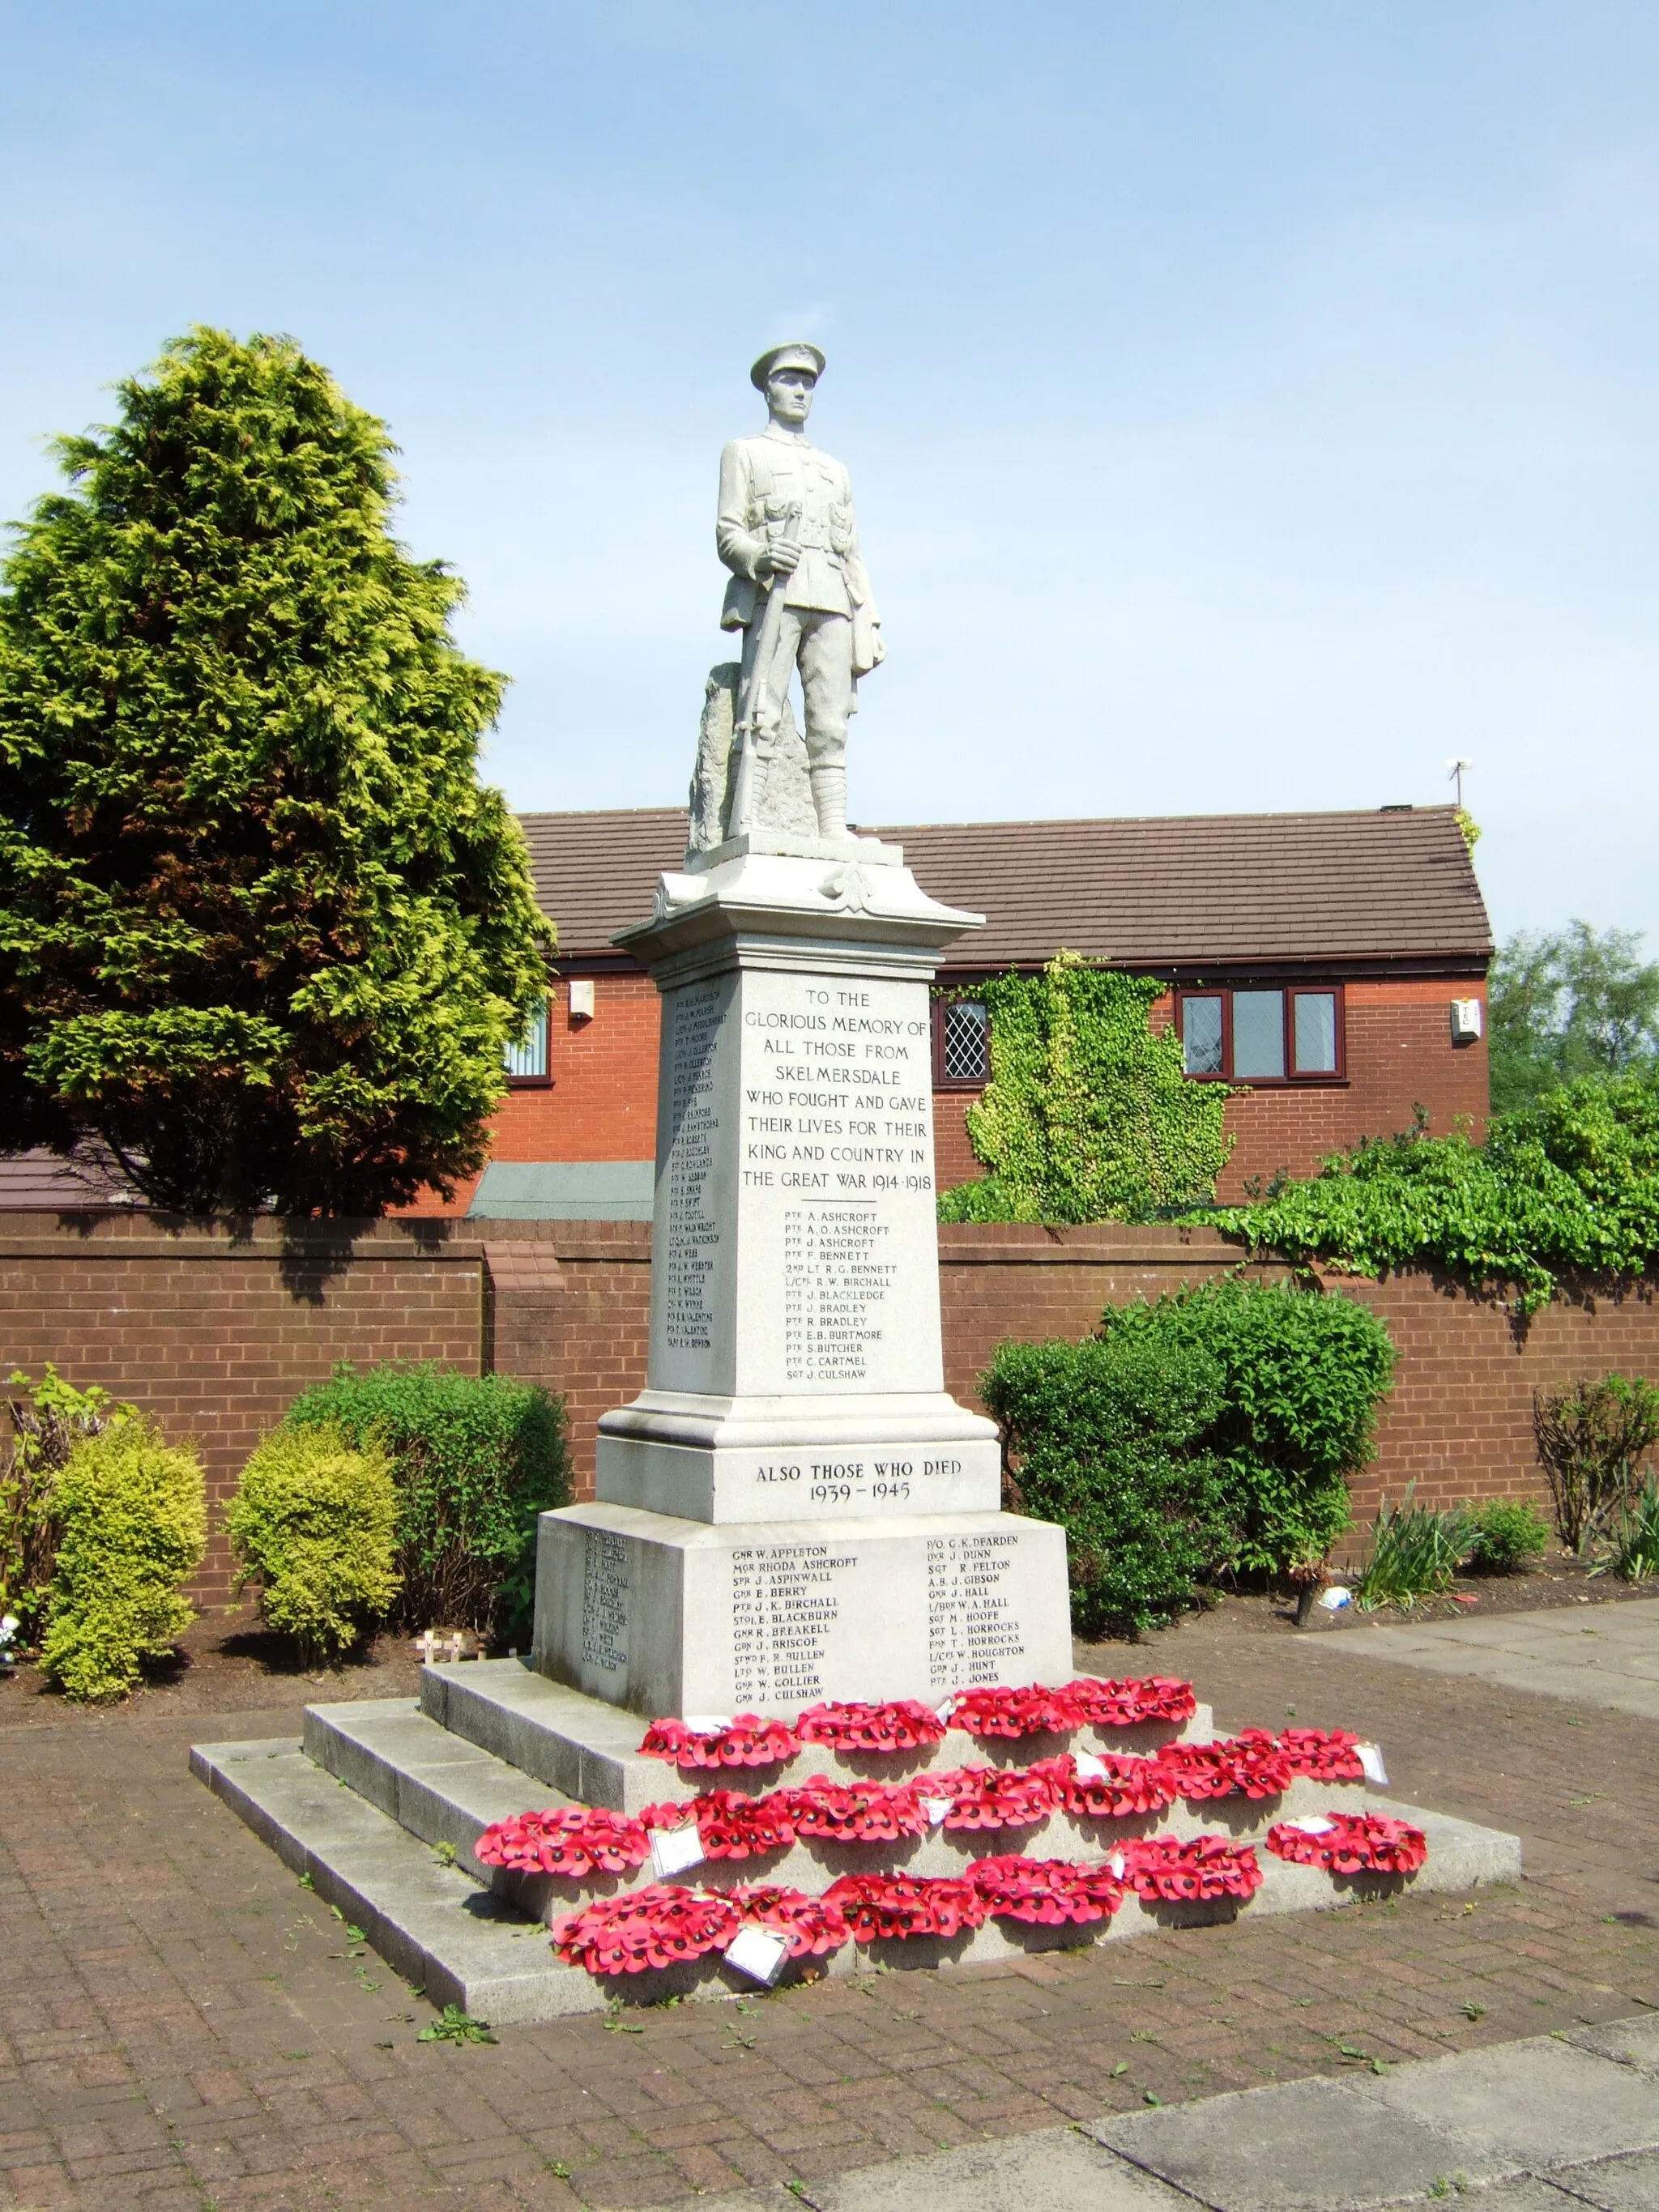 Photo showing: War memorial in Skelmersdale, Lancashire, commemorating local soldiers killed in World War I and World War II.